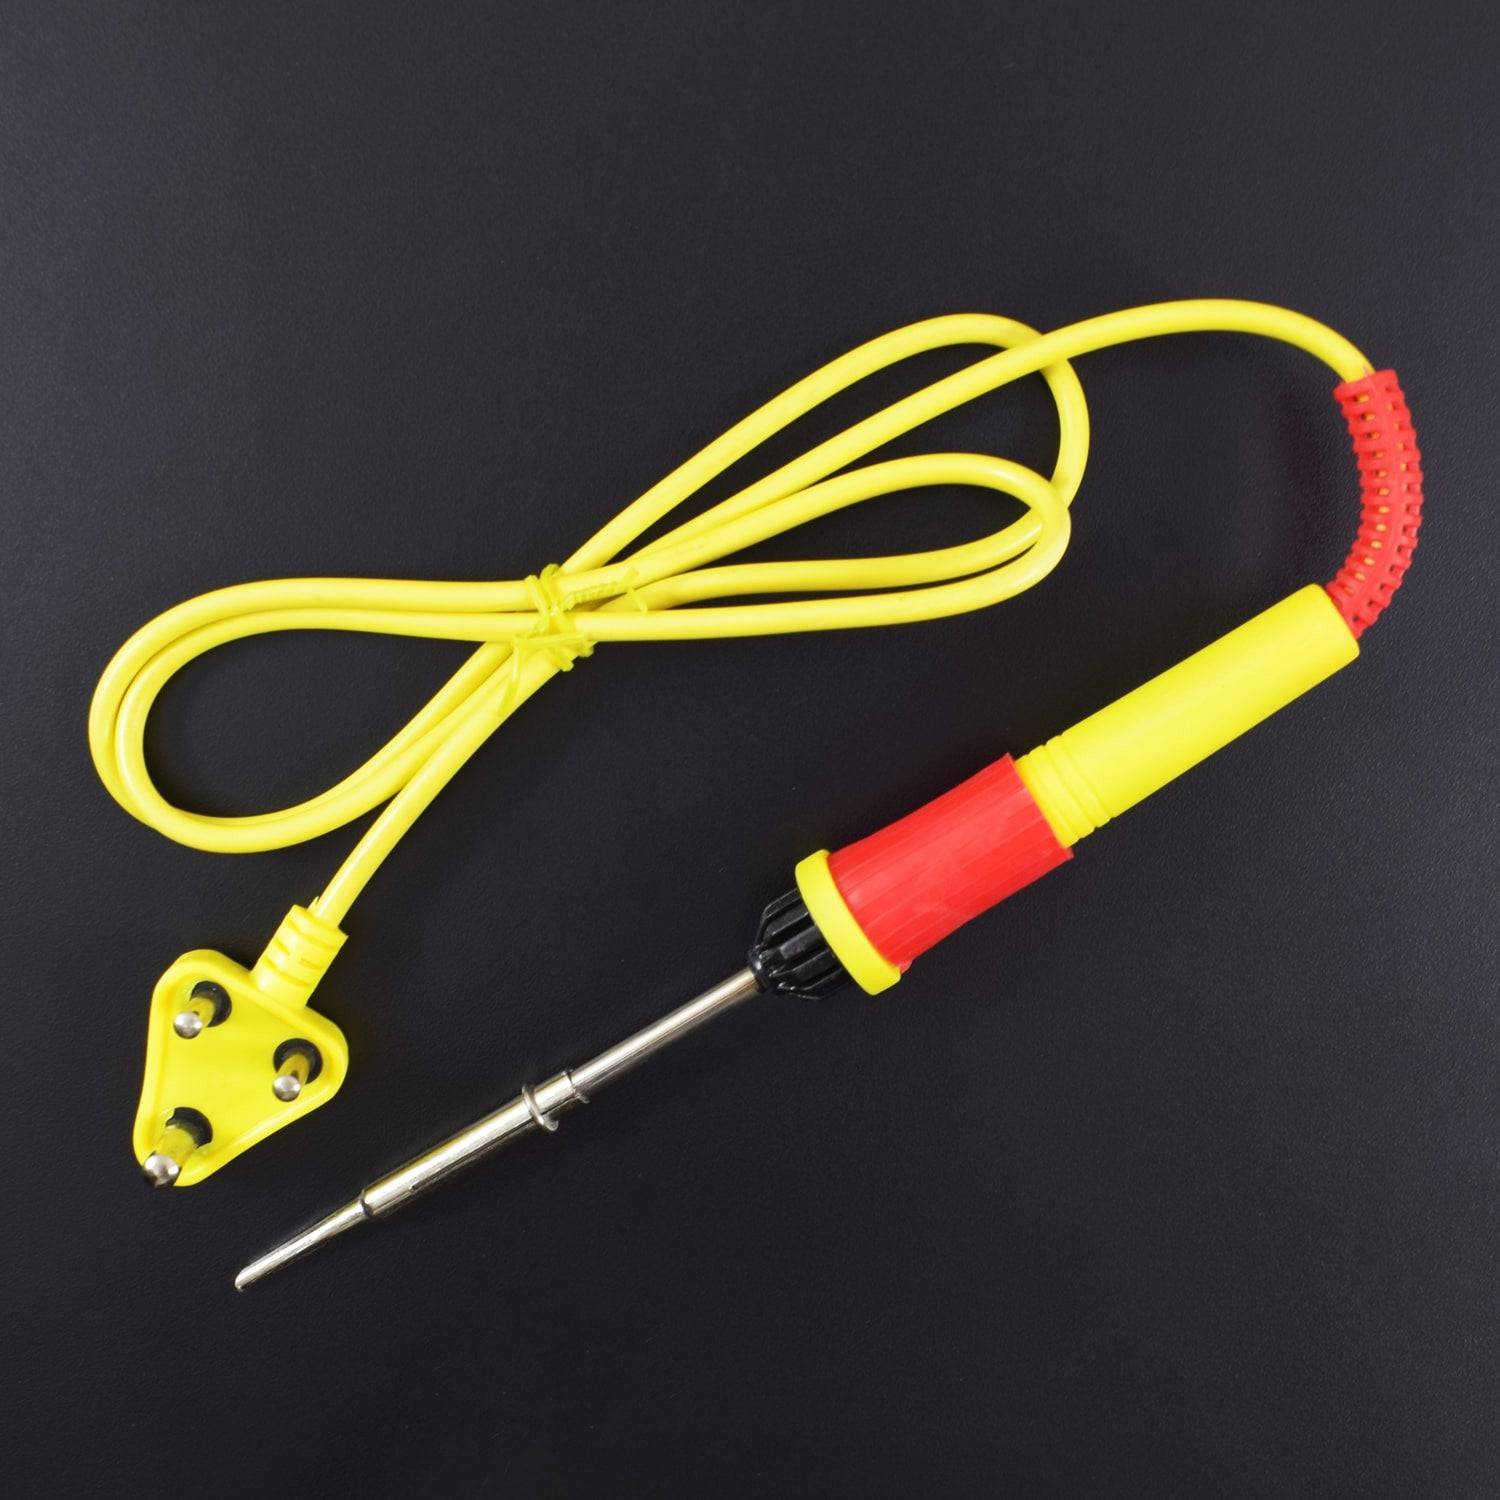 Soldering Iron for home use and small repairing work for electronics devices - EC013 - REES52